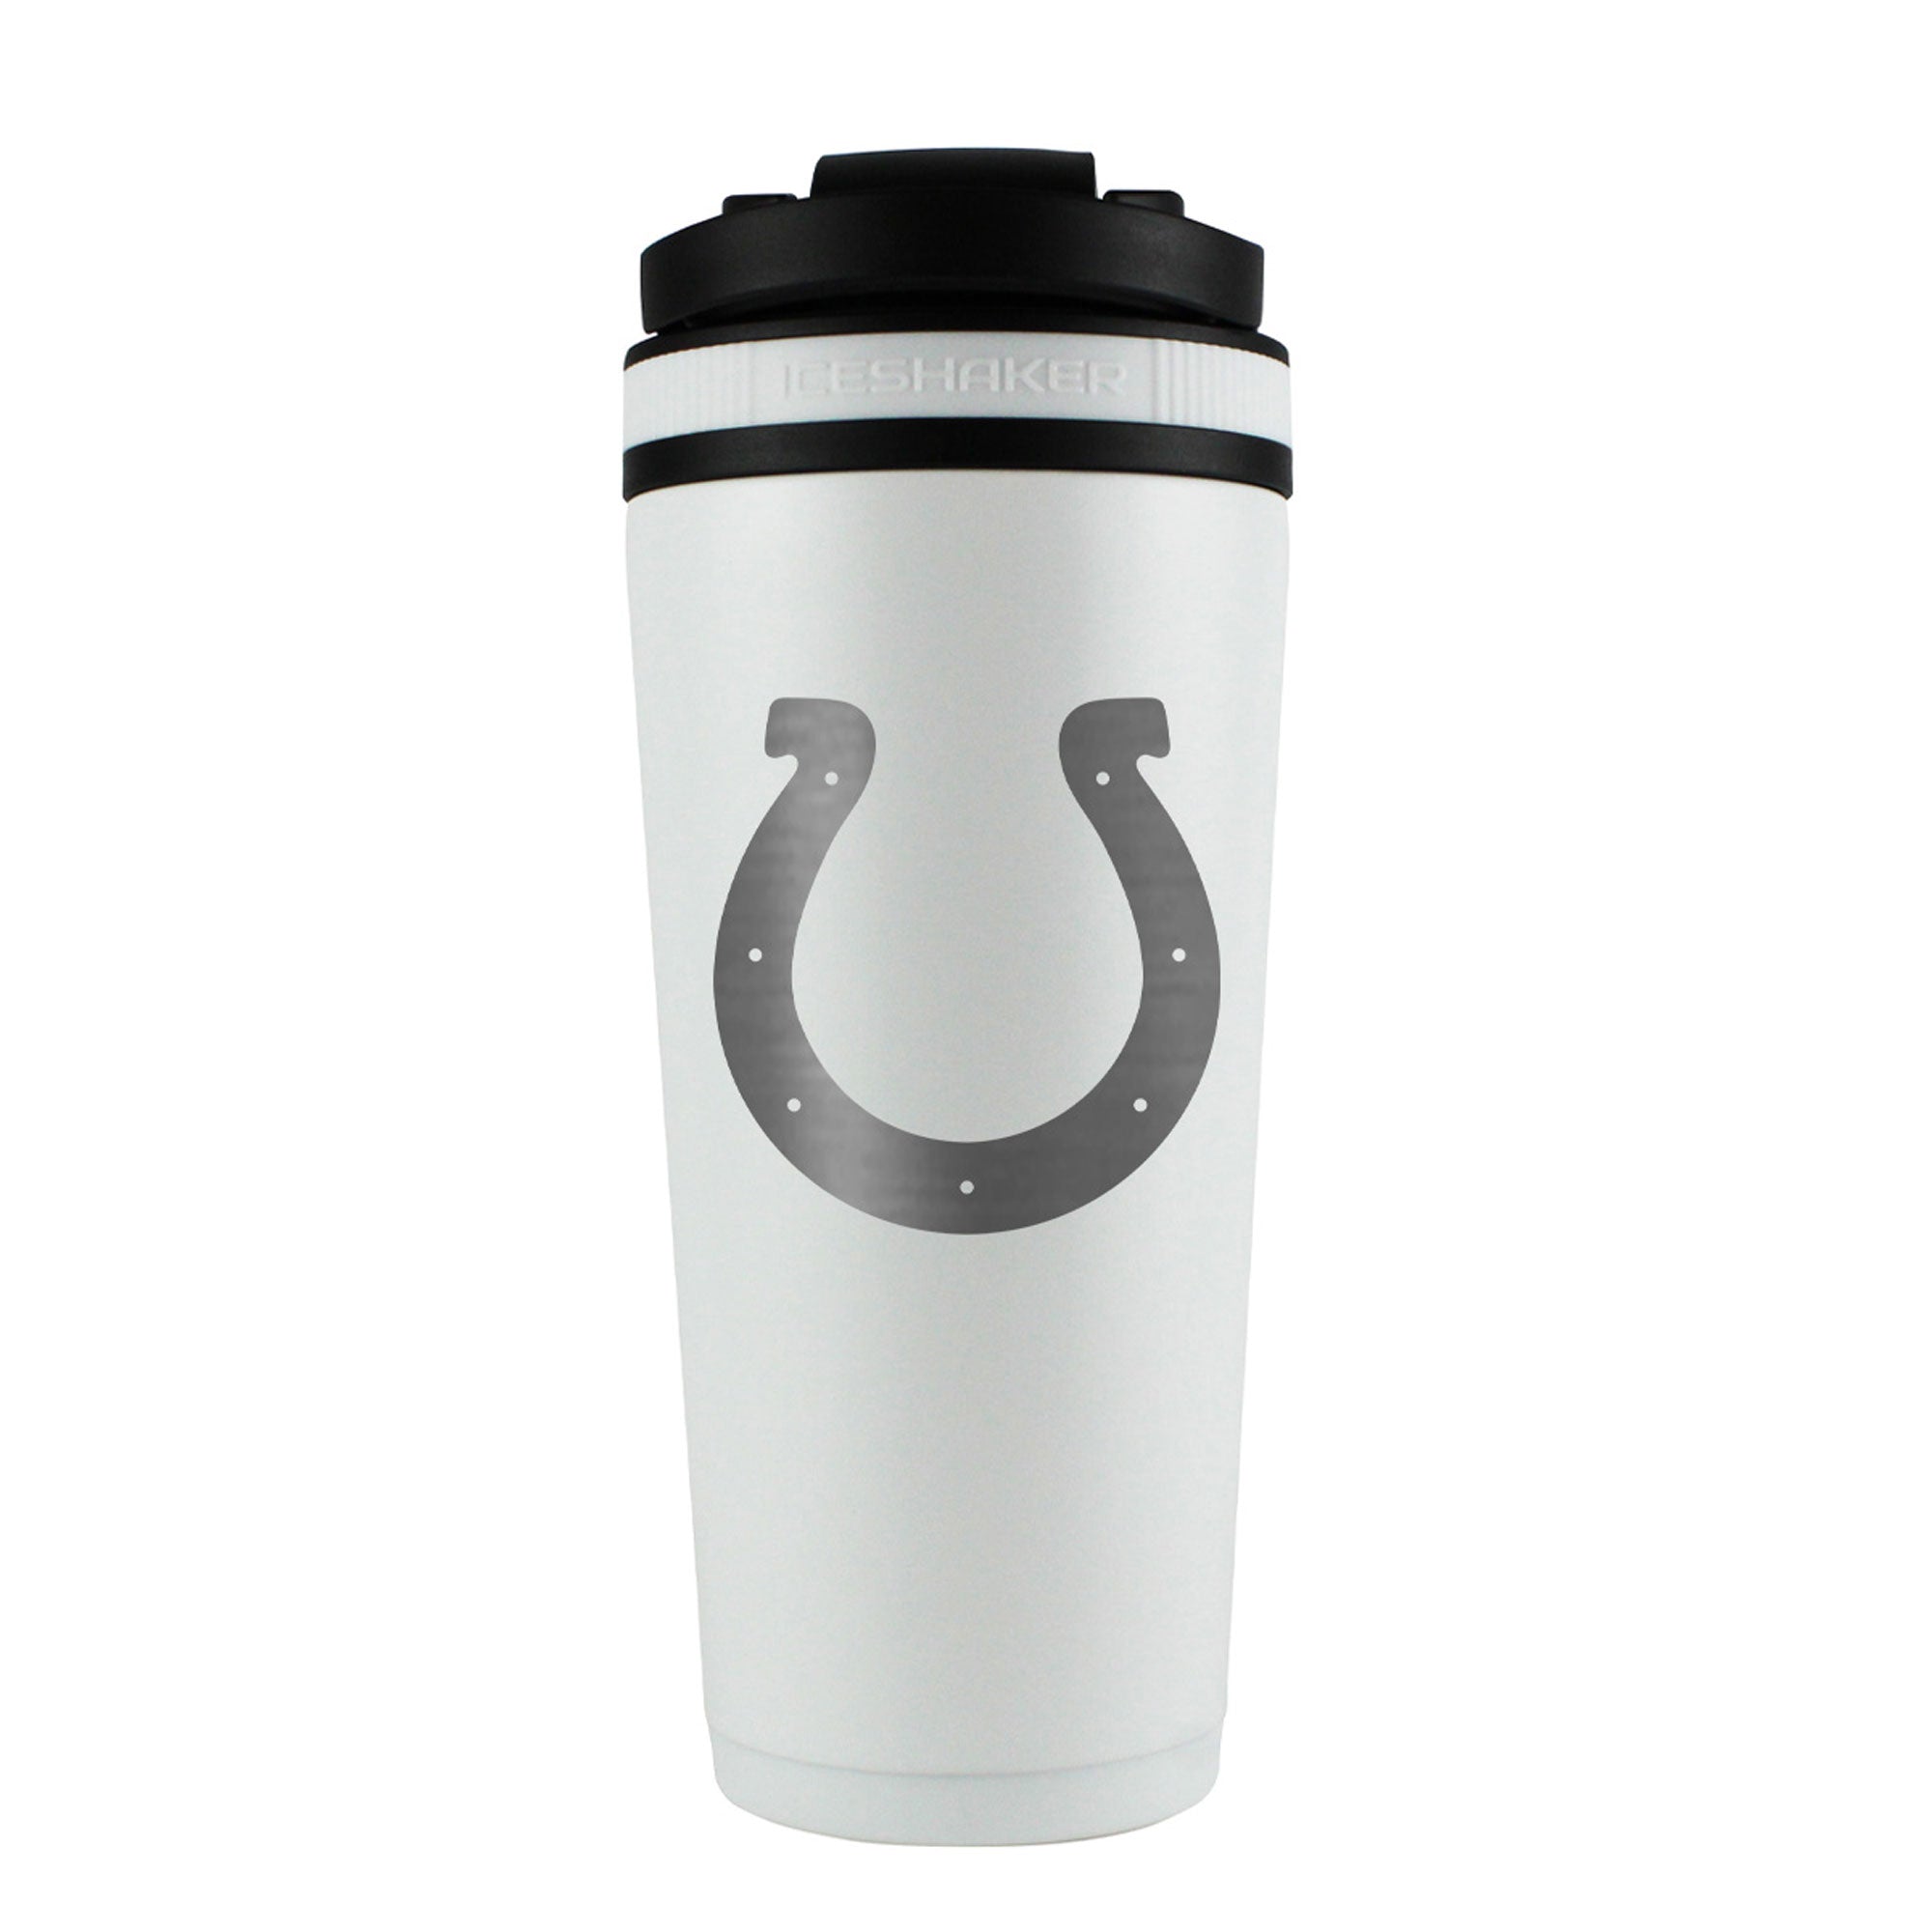 Officially Licensed Indianapolis Colts 26oz Ice Shaker - White